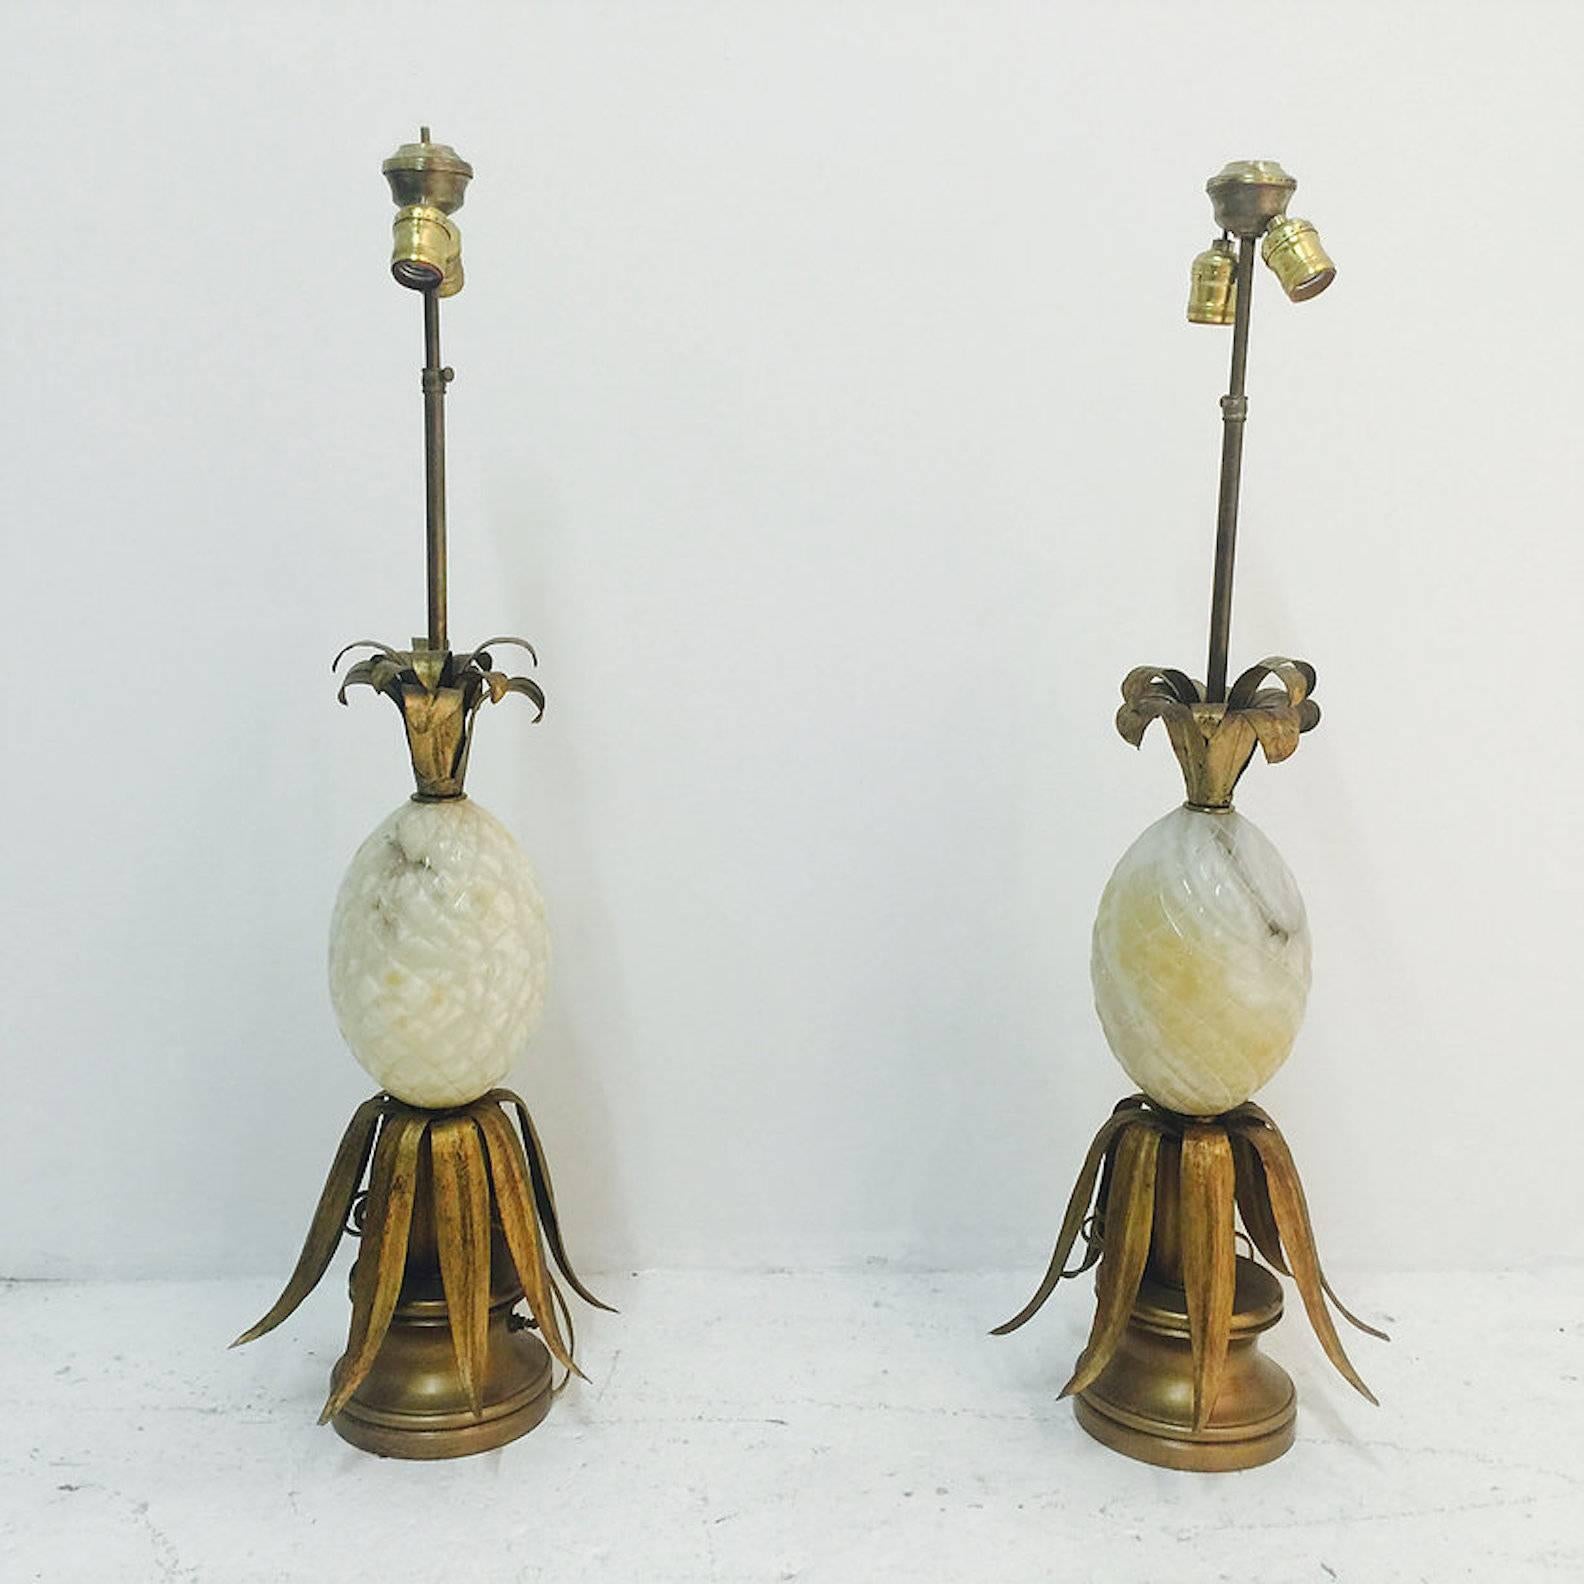 Pair of carved alabaster pineapple lamps with bronze finish. There is visible wear due to age. Original wiring. circa 1950s

Lamps do need repairing

dimensions: 11